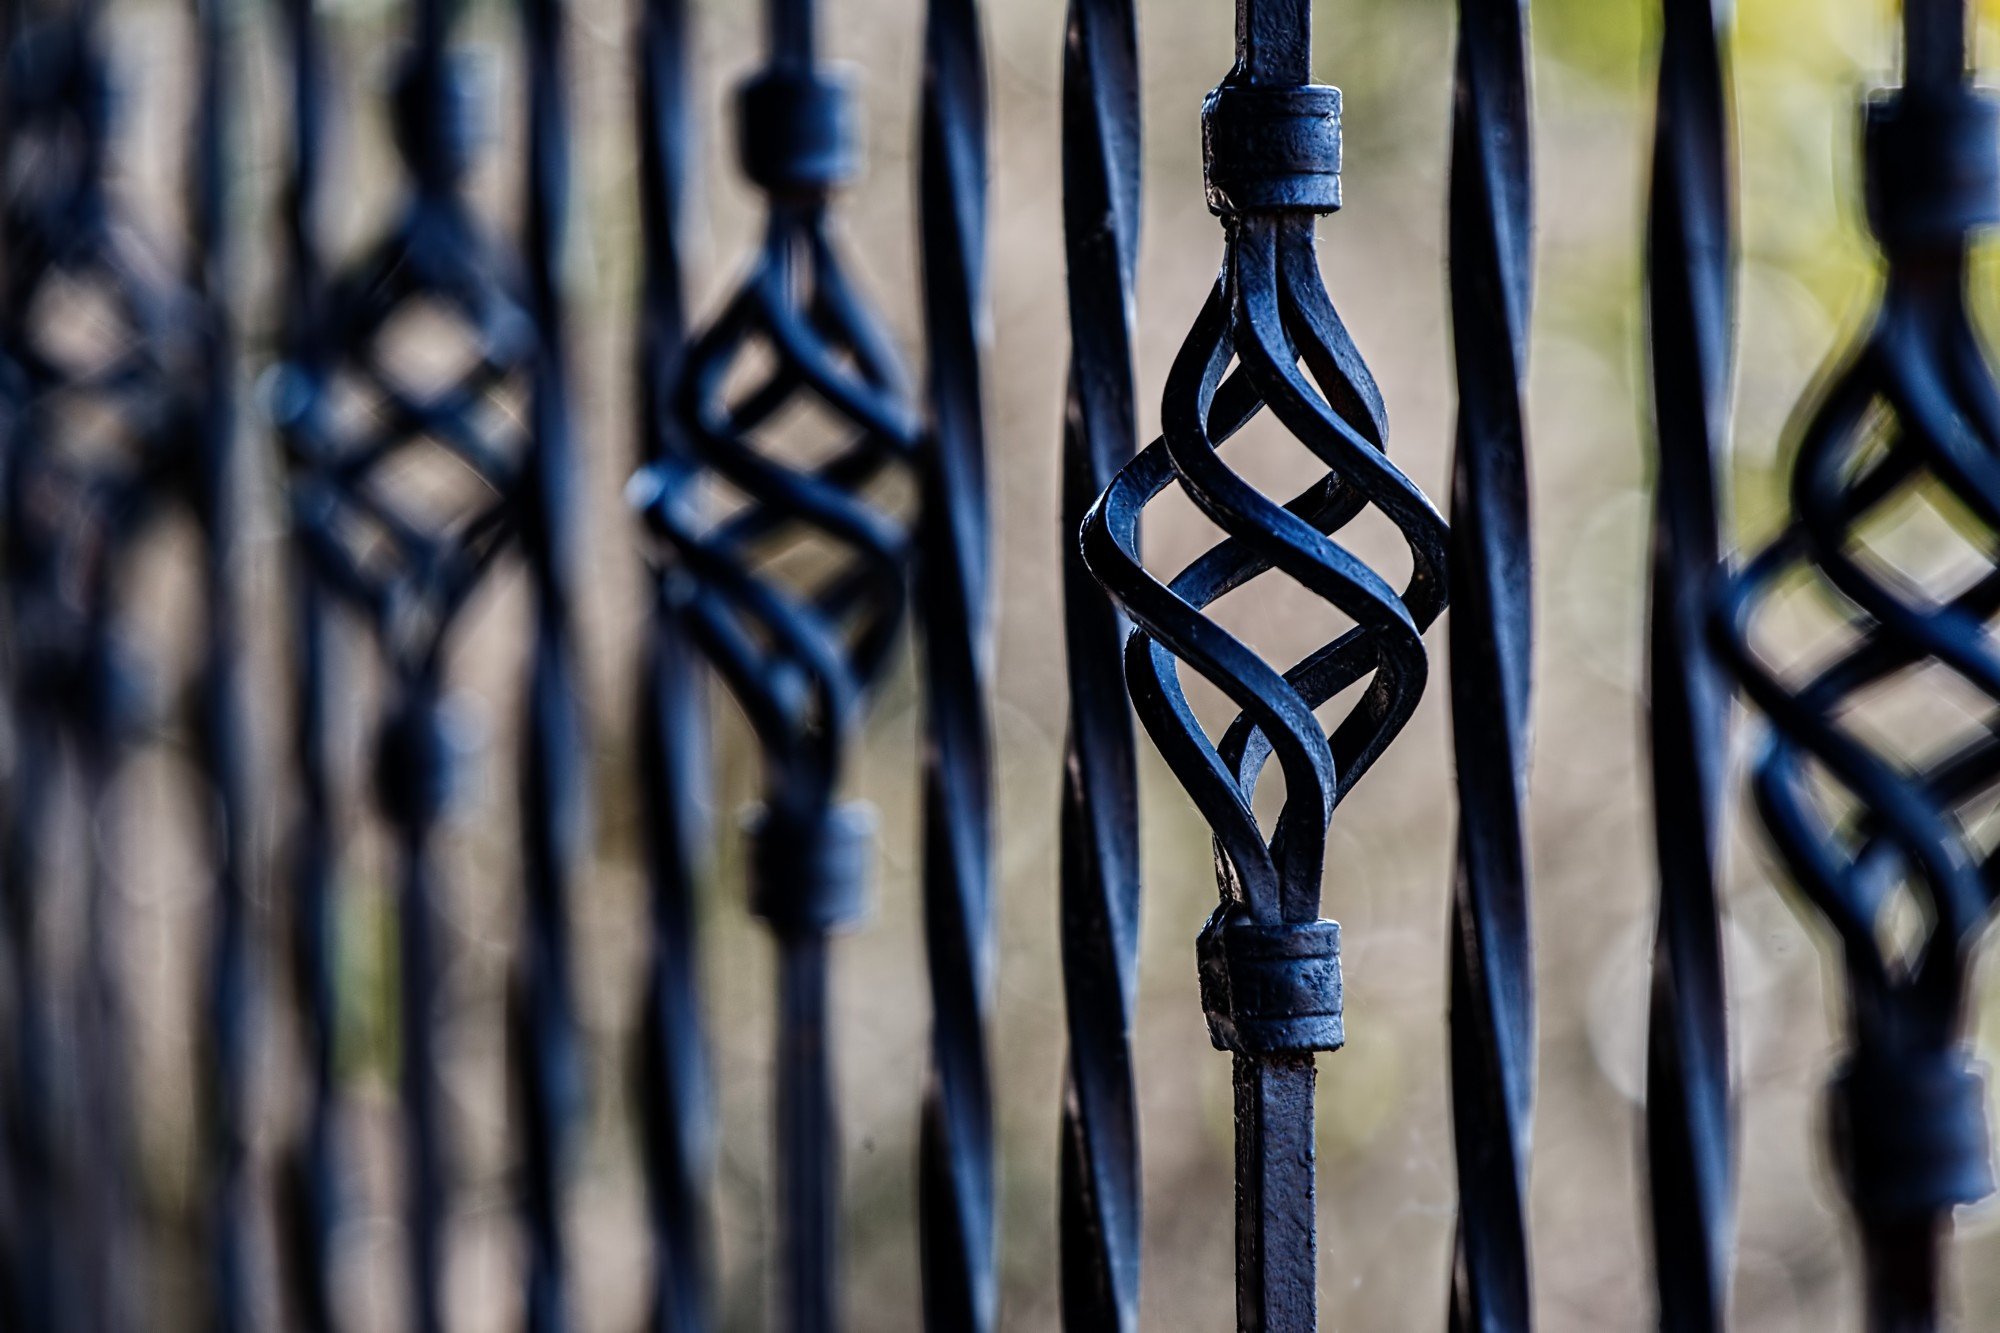 When choosing a fence and gates for your home, it's important to consider how the design will affect the rest of your house.